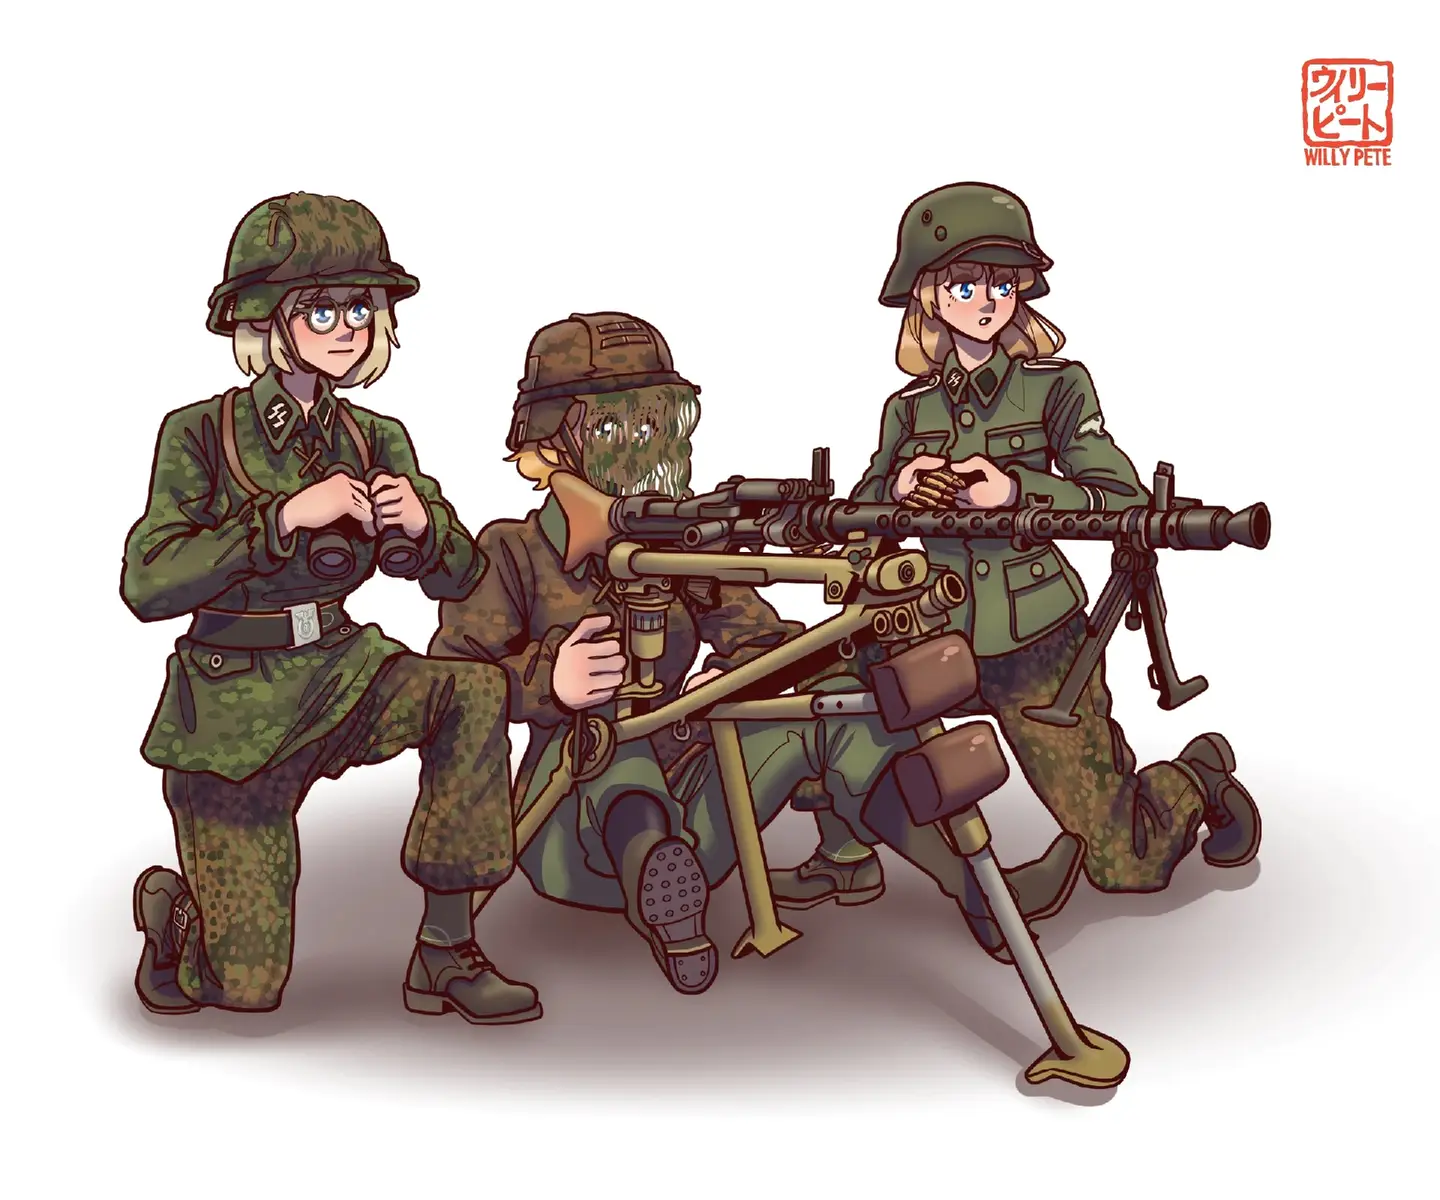 we interrupt your regularly scheduled NDF lore post to bring you this Willy Pete post. #anime #willypete #tactical #military #art #larping #warthunder #squad #hellletloose #risingstorm2vietnam #rainbowsixsiege #weeb